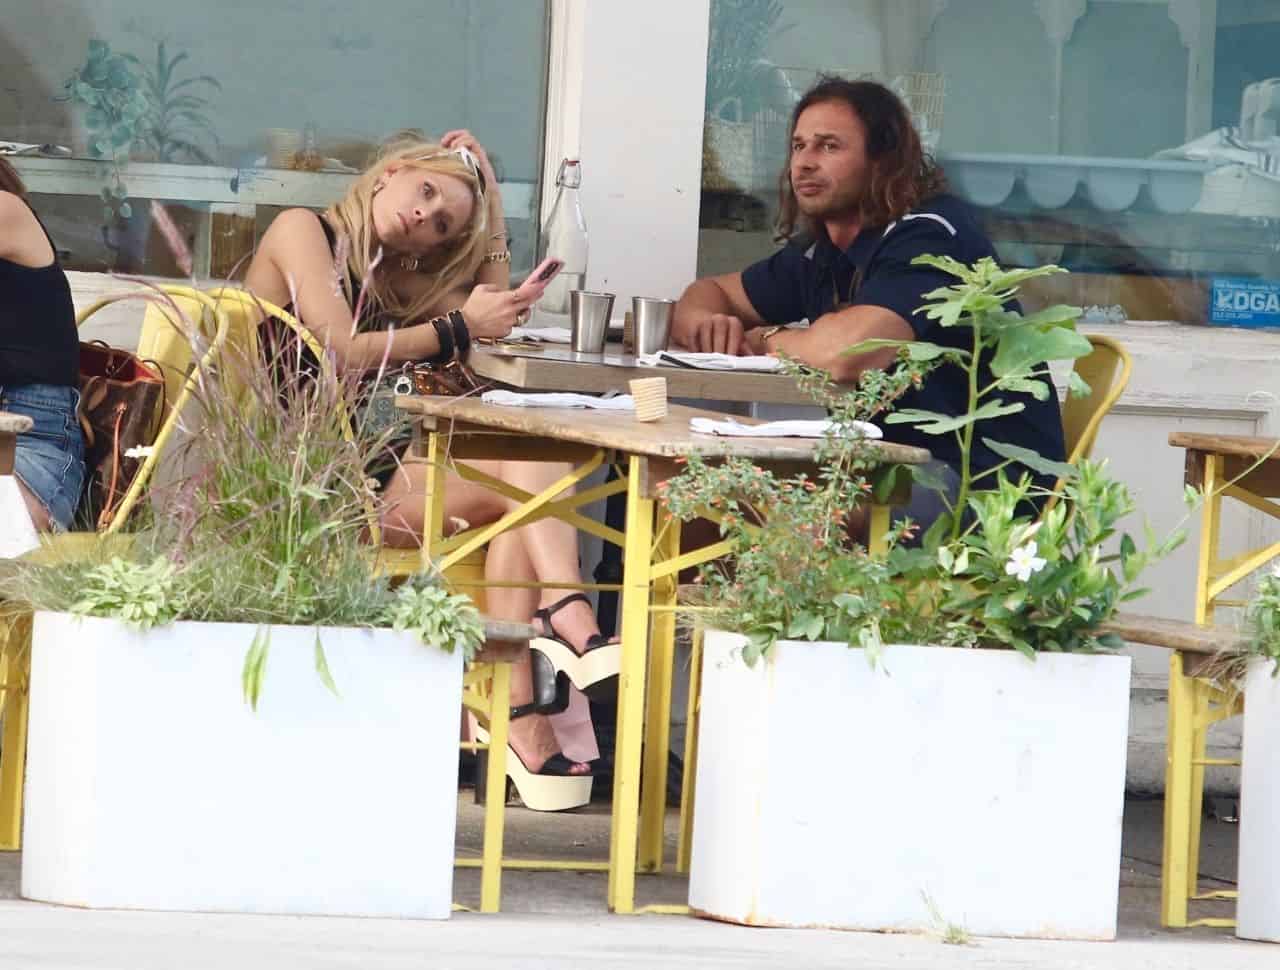 Juno Temple Was Spotted in a Mini Dress in New York with Her New Boyfriend